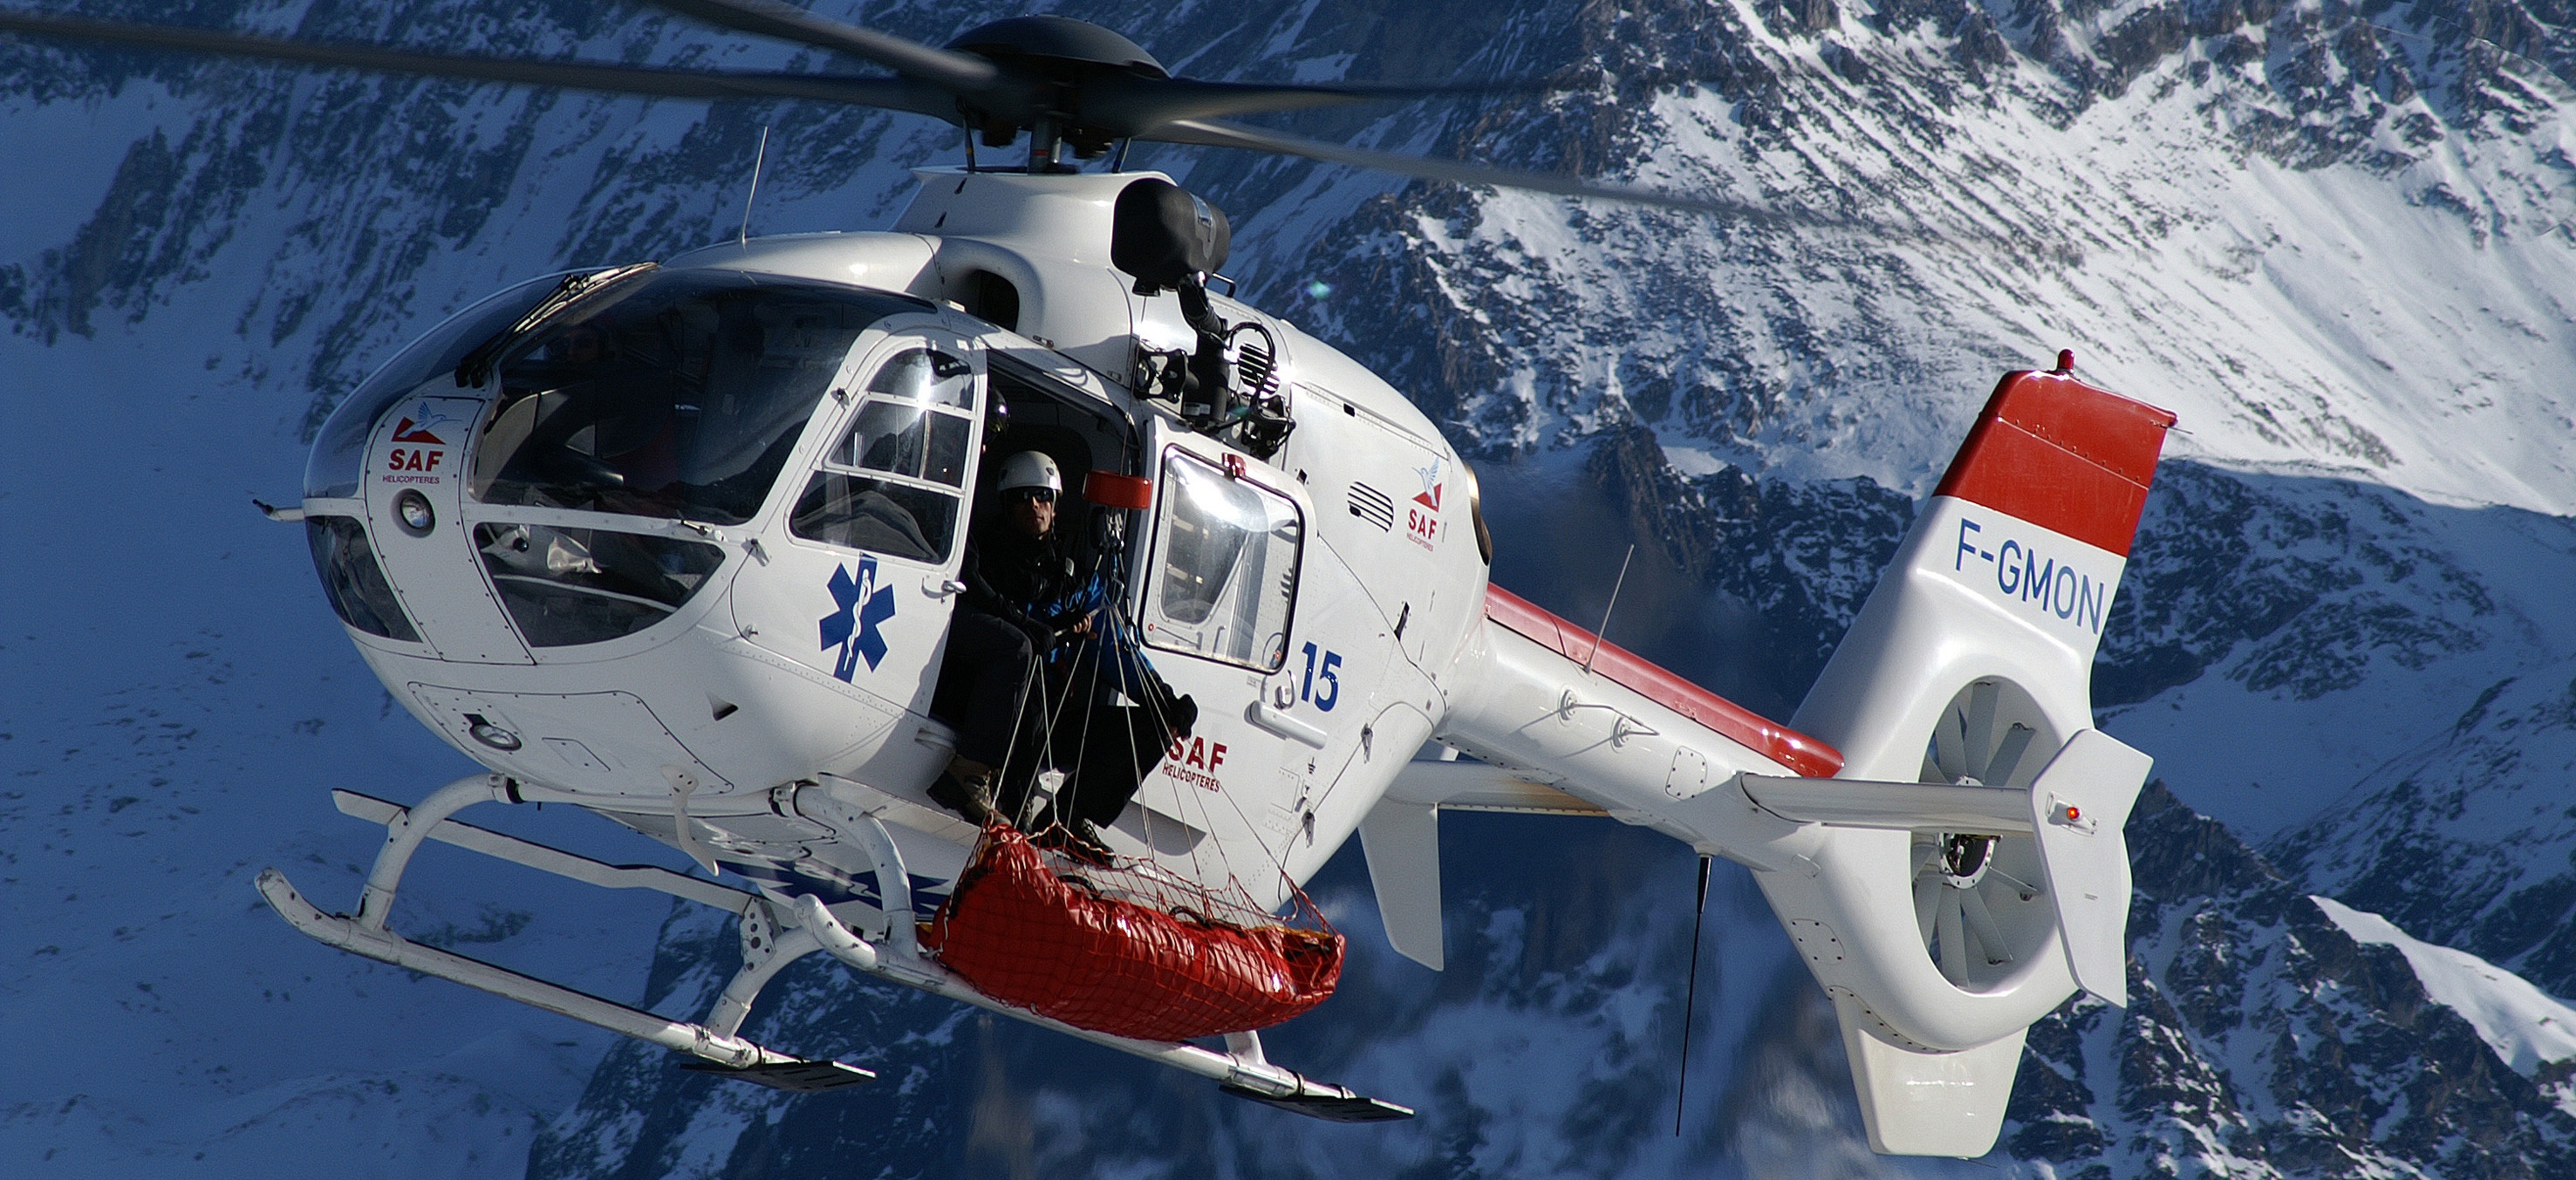 Eurocopter launches the EC135 T3/P3 members of its enhanced helicopter family with orders from the U.S., Norway and Italy